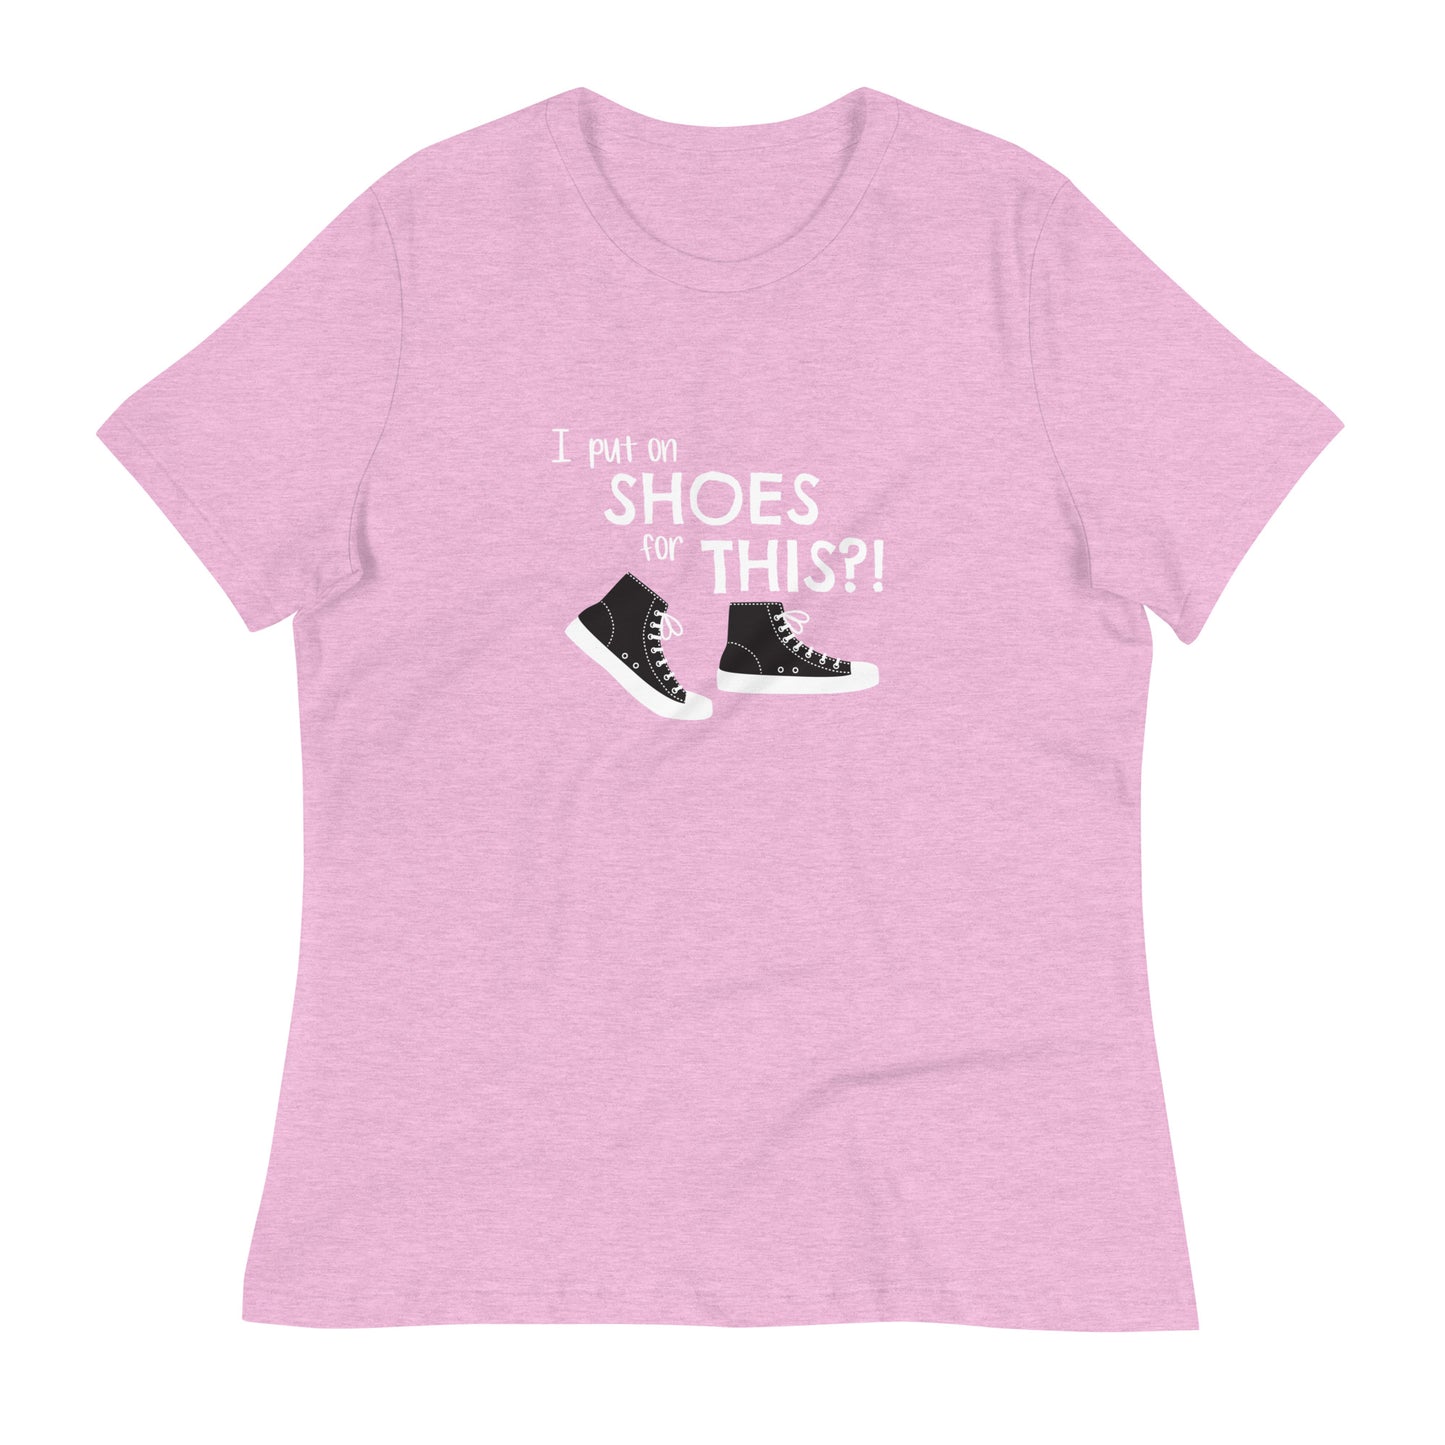 Heather Prism Lilac women's relaxed fit t-shirt with graphic of black and white canvas "chuck" sneakers and text: "I put on SHOES for THIS?!"